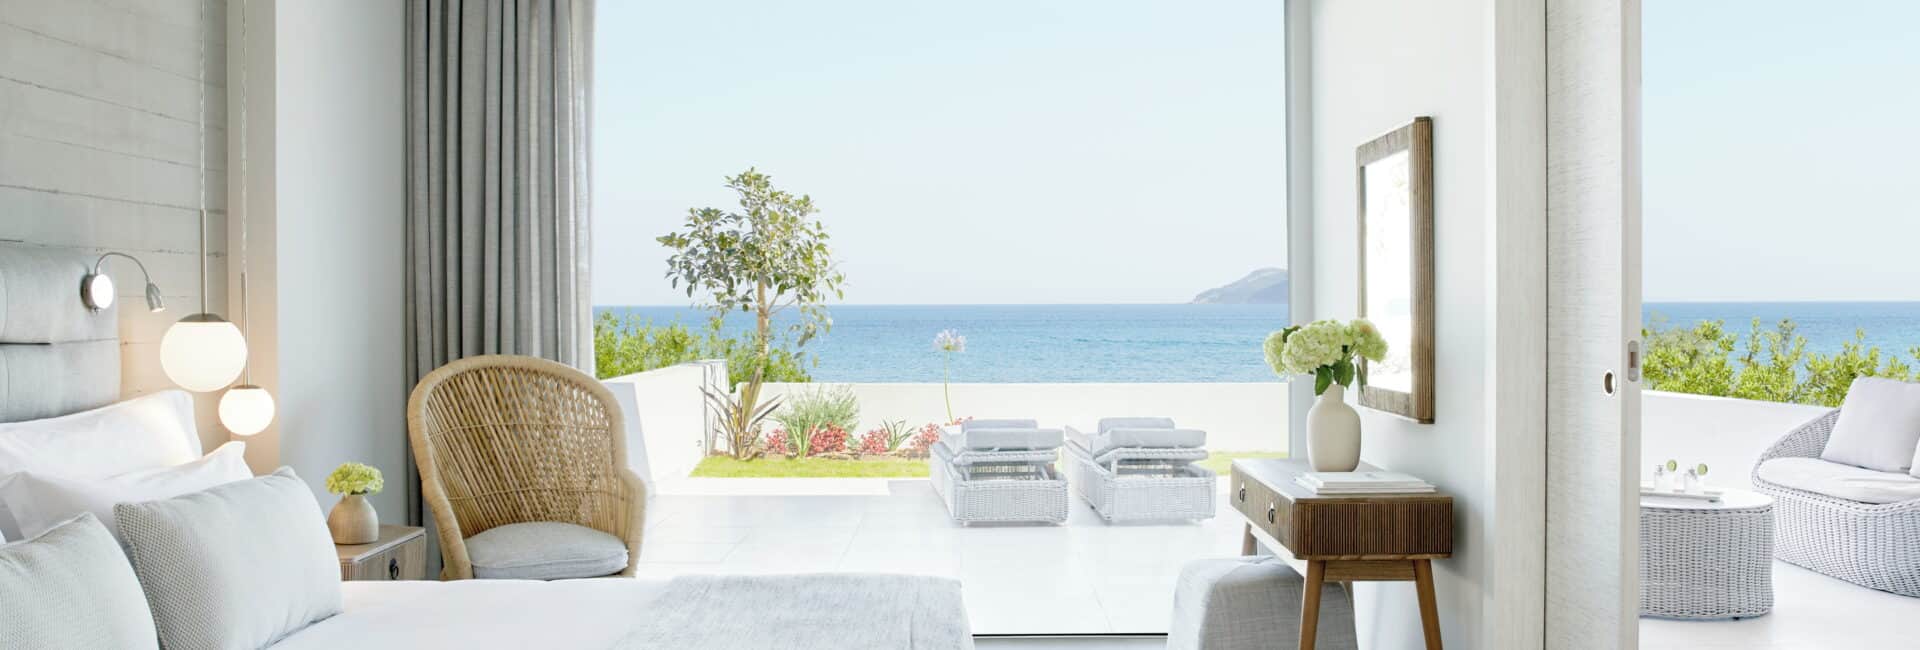 Ikos Aria _ One Bedroom Suite with Private Garden_2880x1920